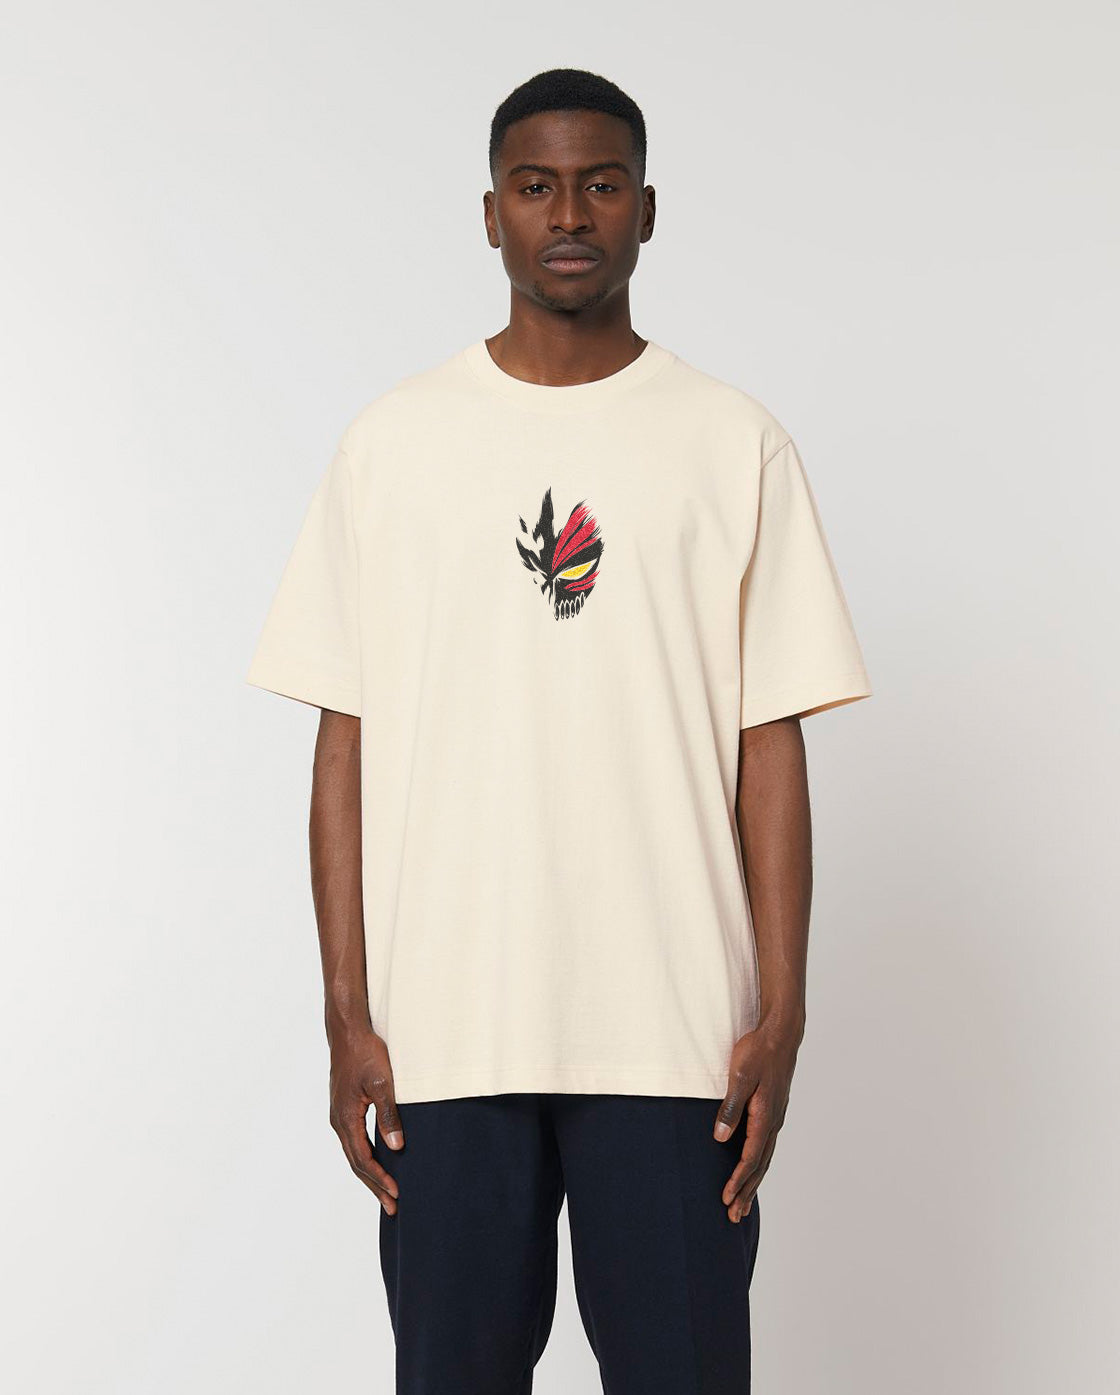 MADE IN JAPAN - HOLLOW® SAND T-SHIRT